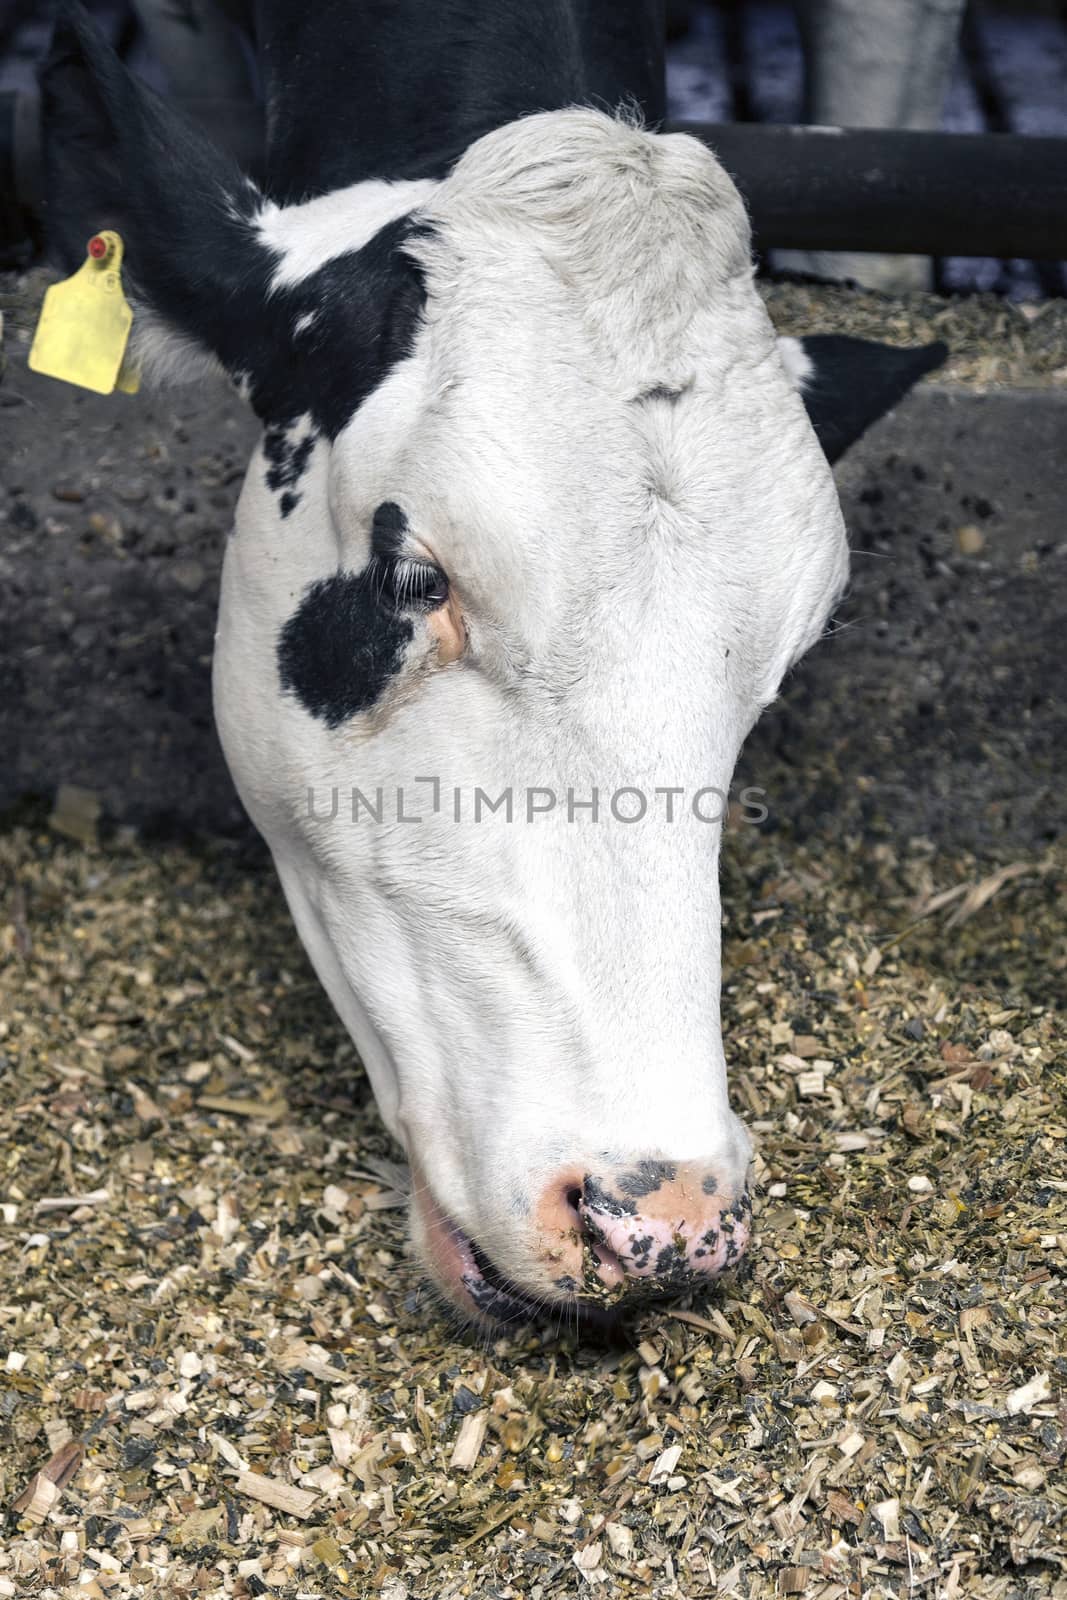 white head of eating cow in stable